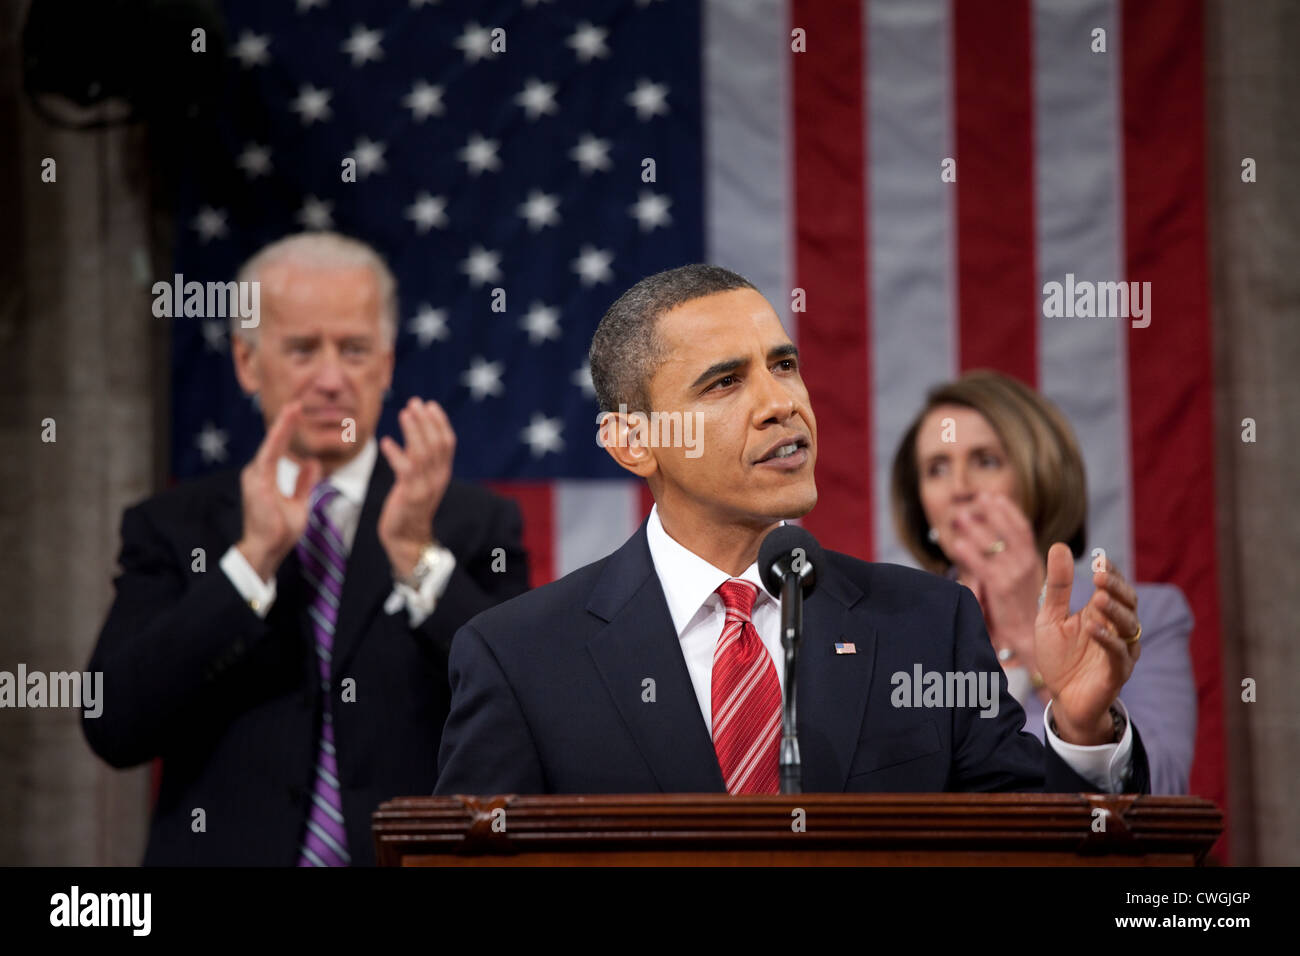 President Barack Obama gives his State of the Union address to a joint session of Congress in the House Chamber of the U.S. Capi Stock Photo